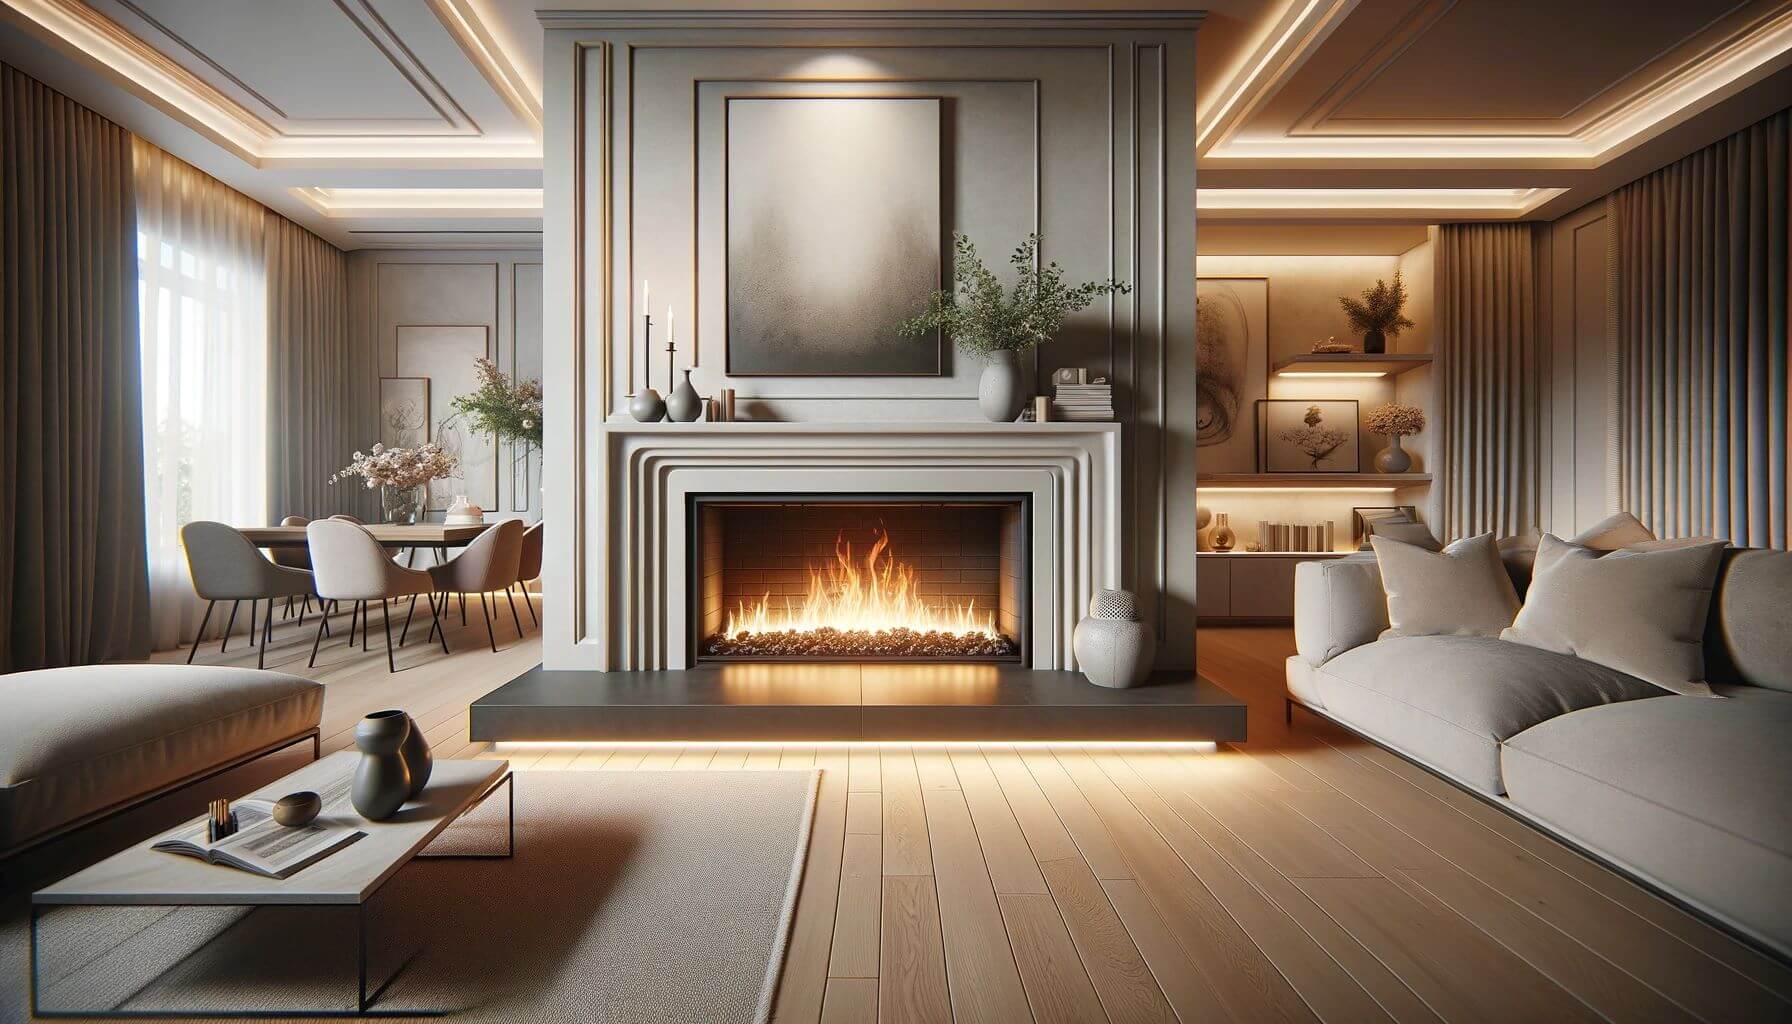 How to Design Fireplace Hearth: 50 Stunning Ideas